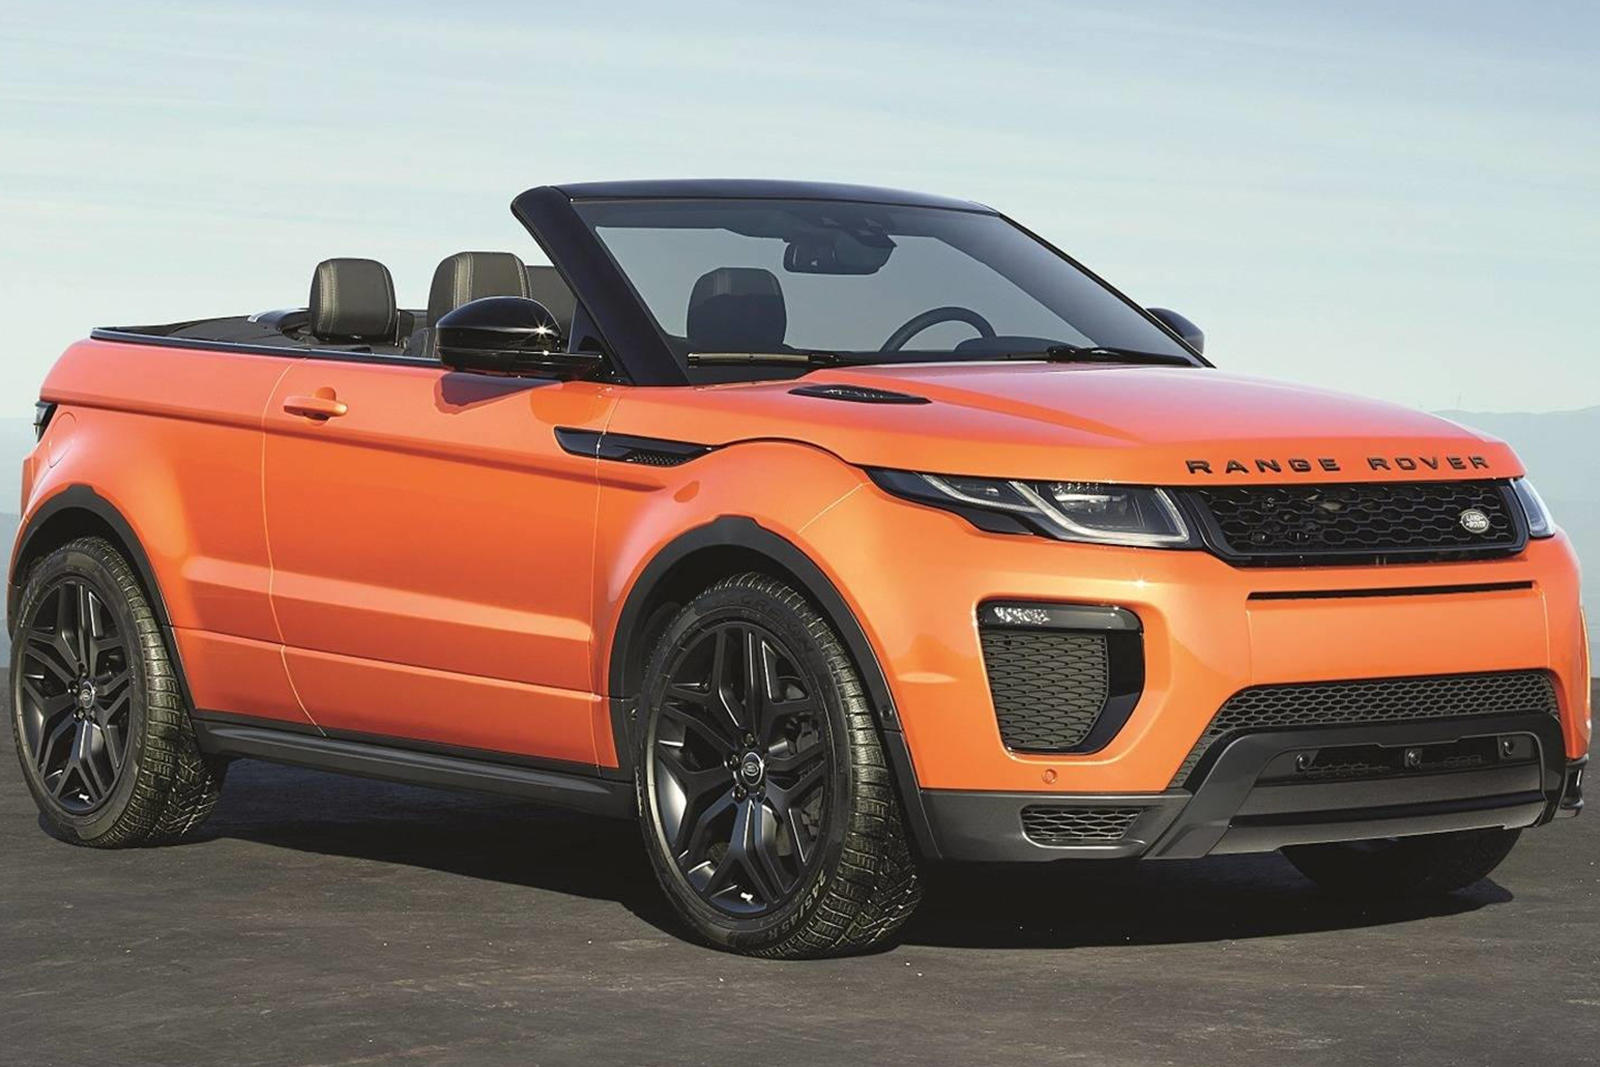 Jibstay [38+] New Range Rover Evoque Convertible 2020